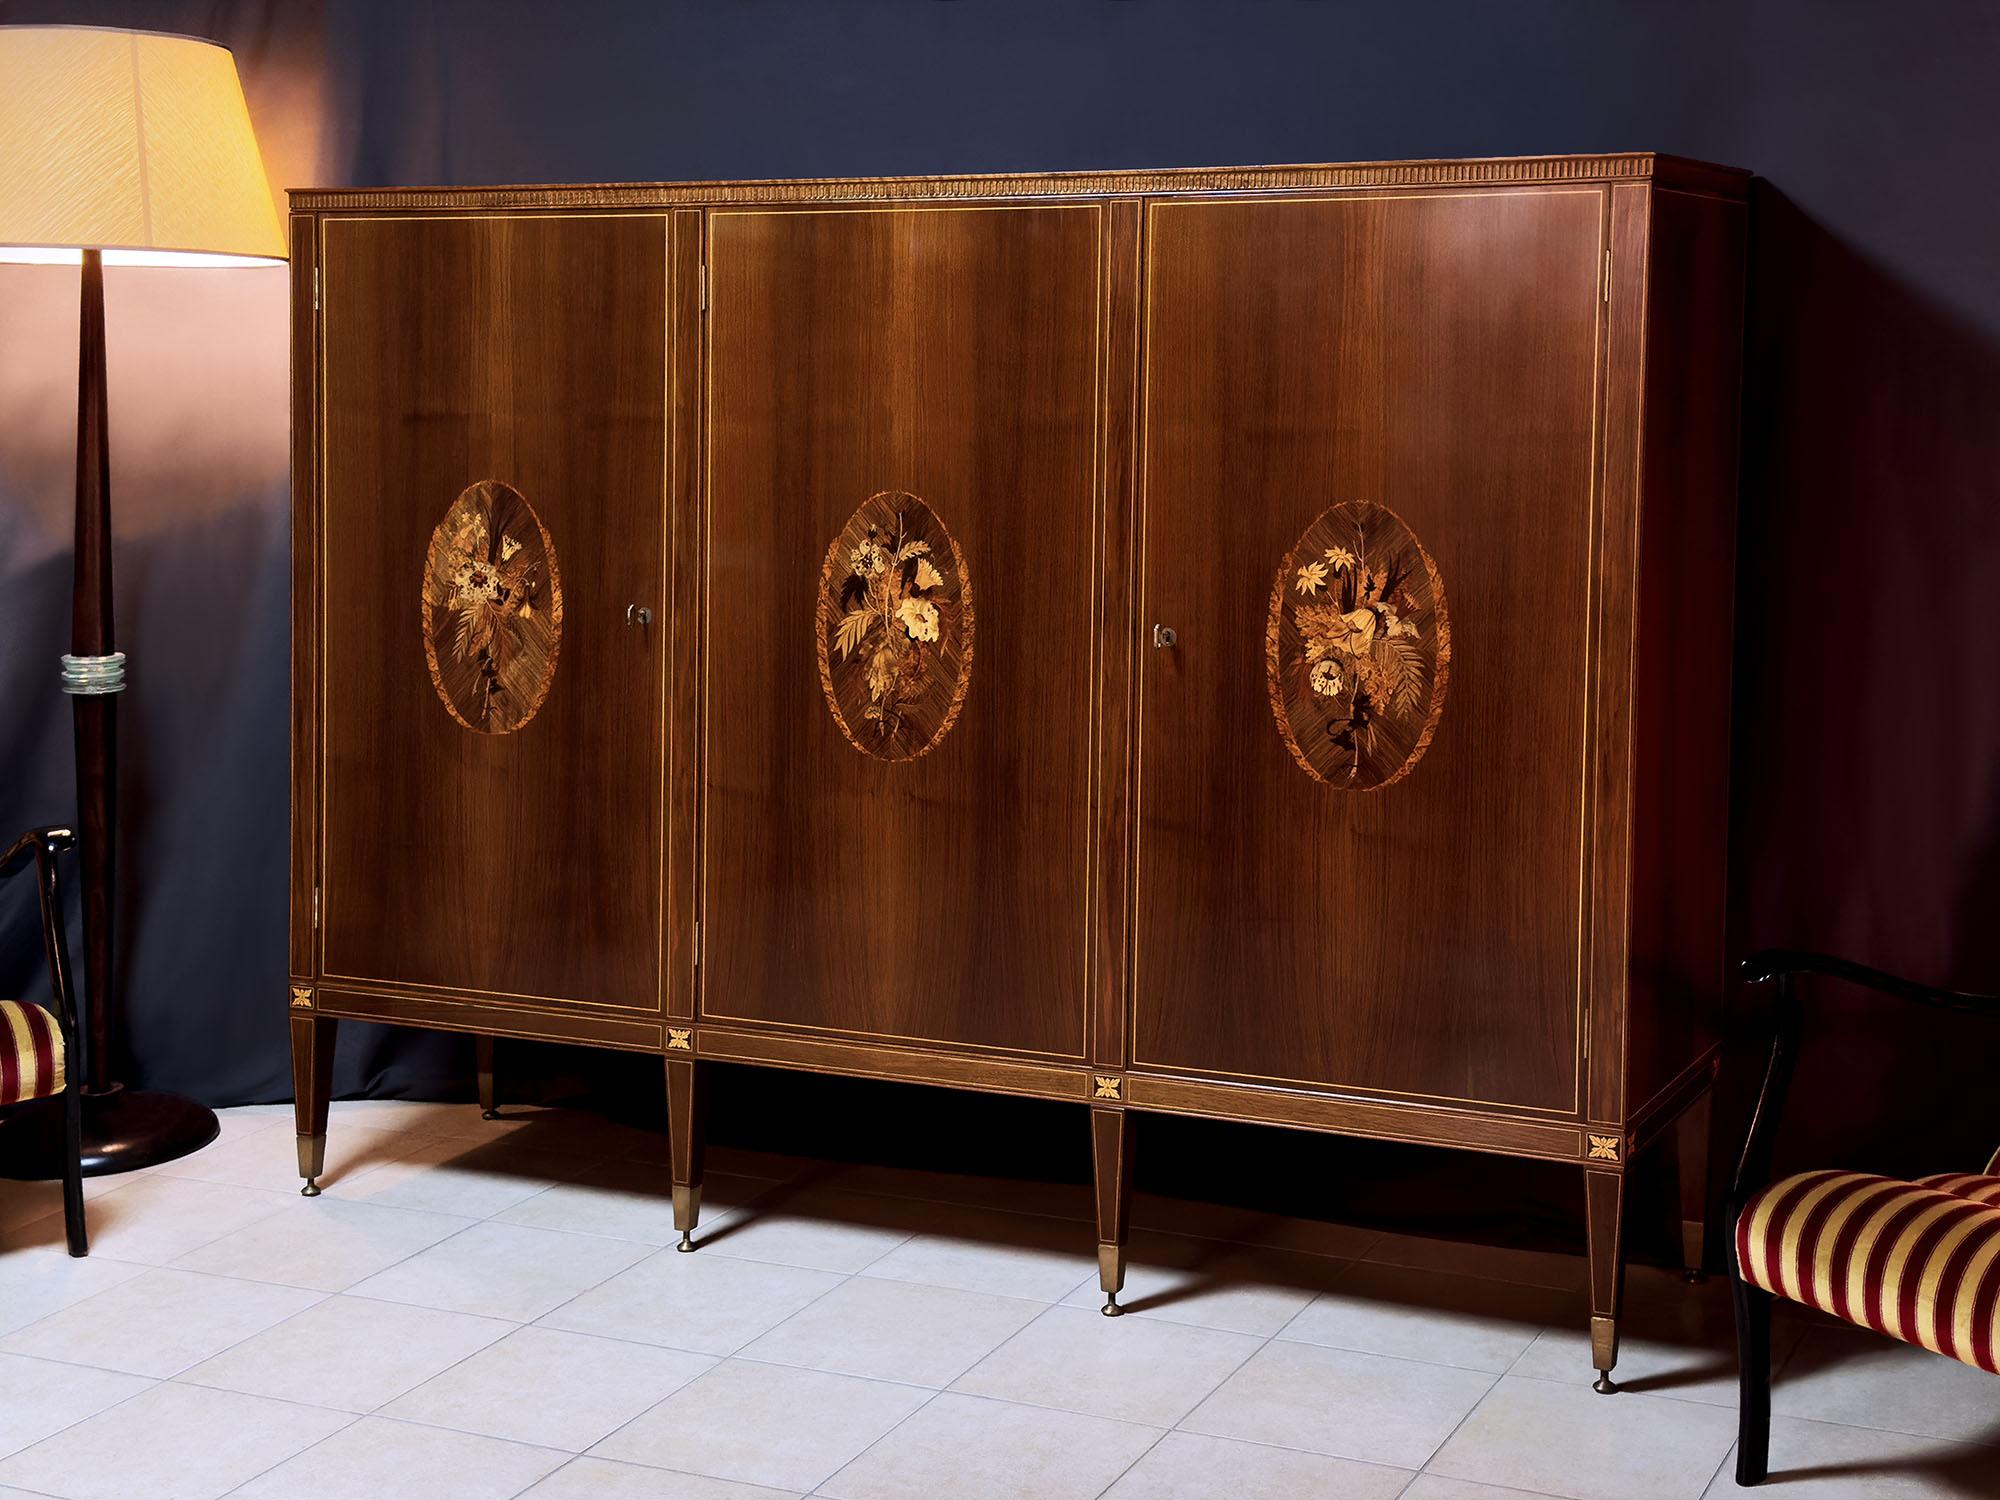 Italian Mid-Century Sideboard with Inlays by Anzani for Marelli & Colico, 1950s For Sale 2